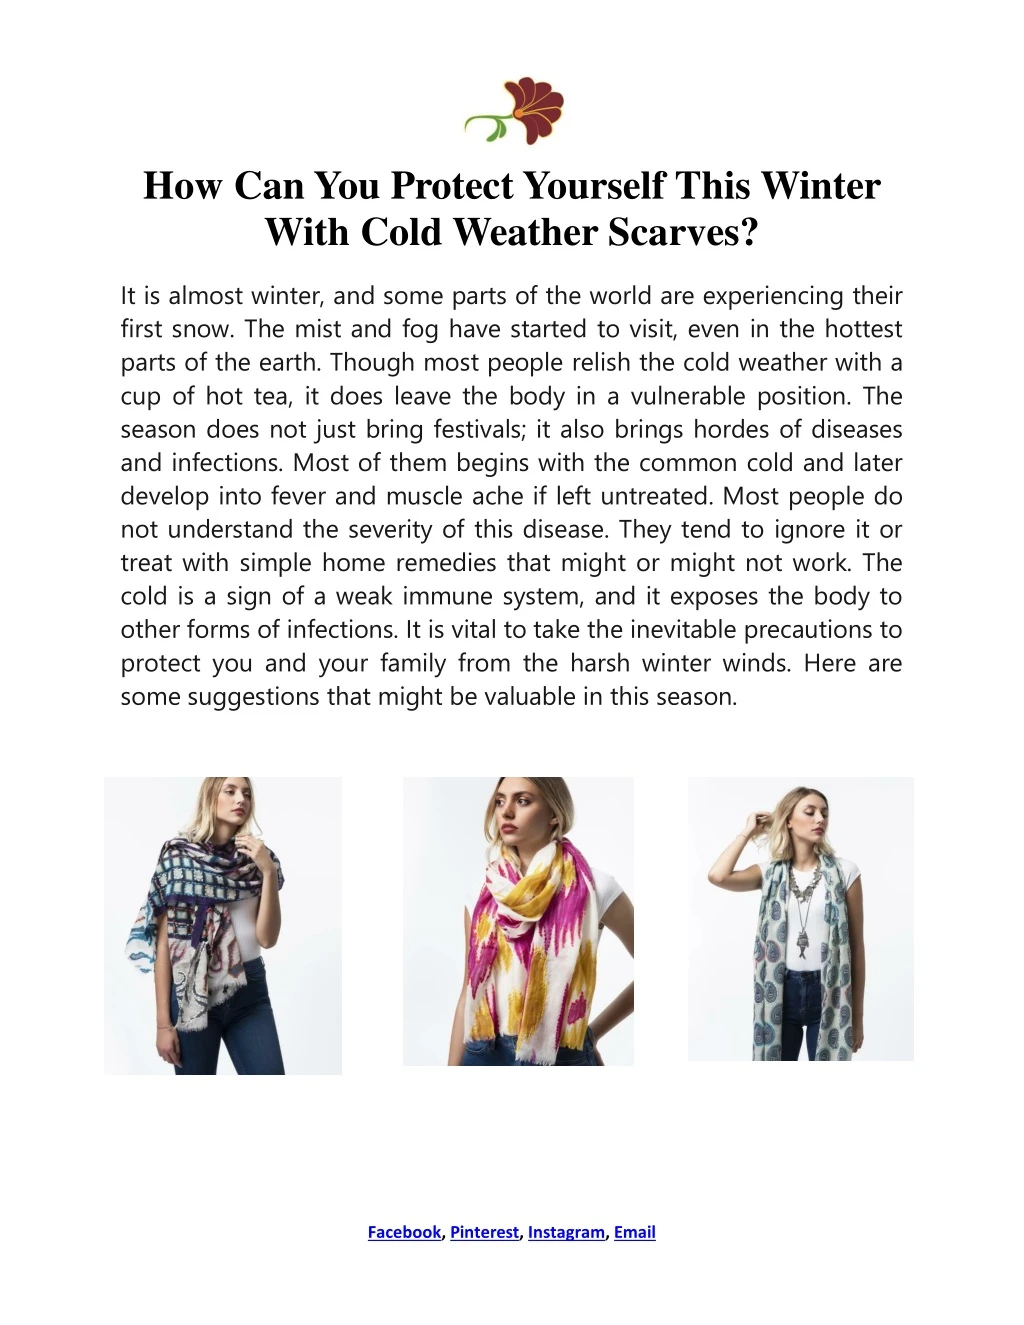 how can you protect yourself this winter with